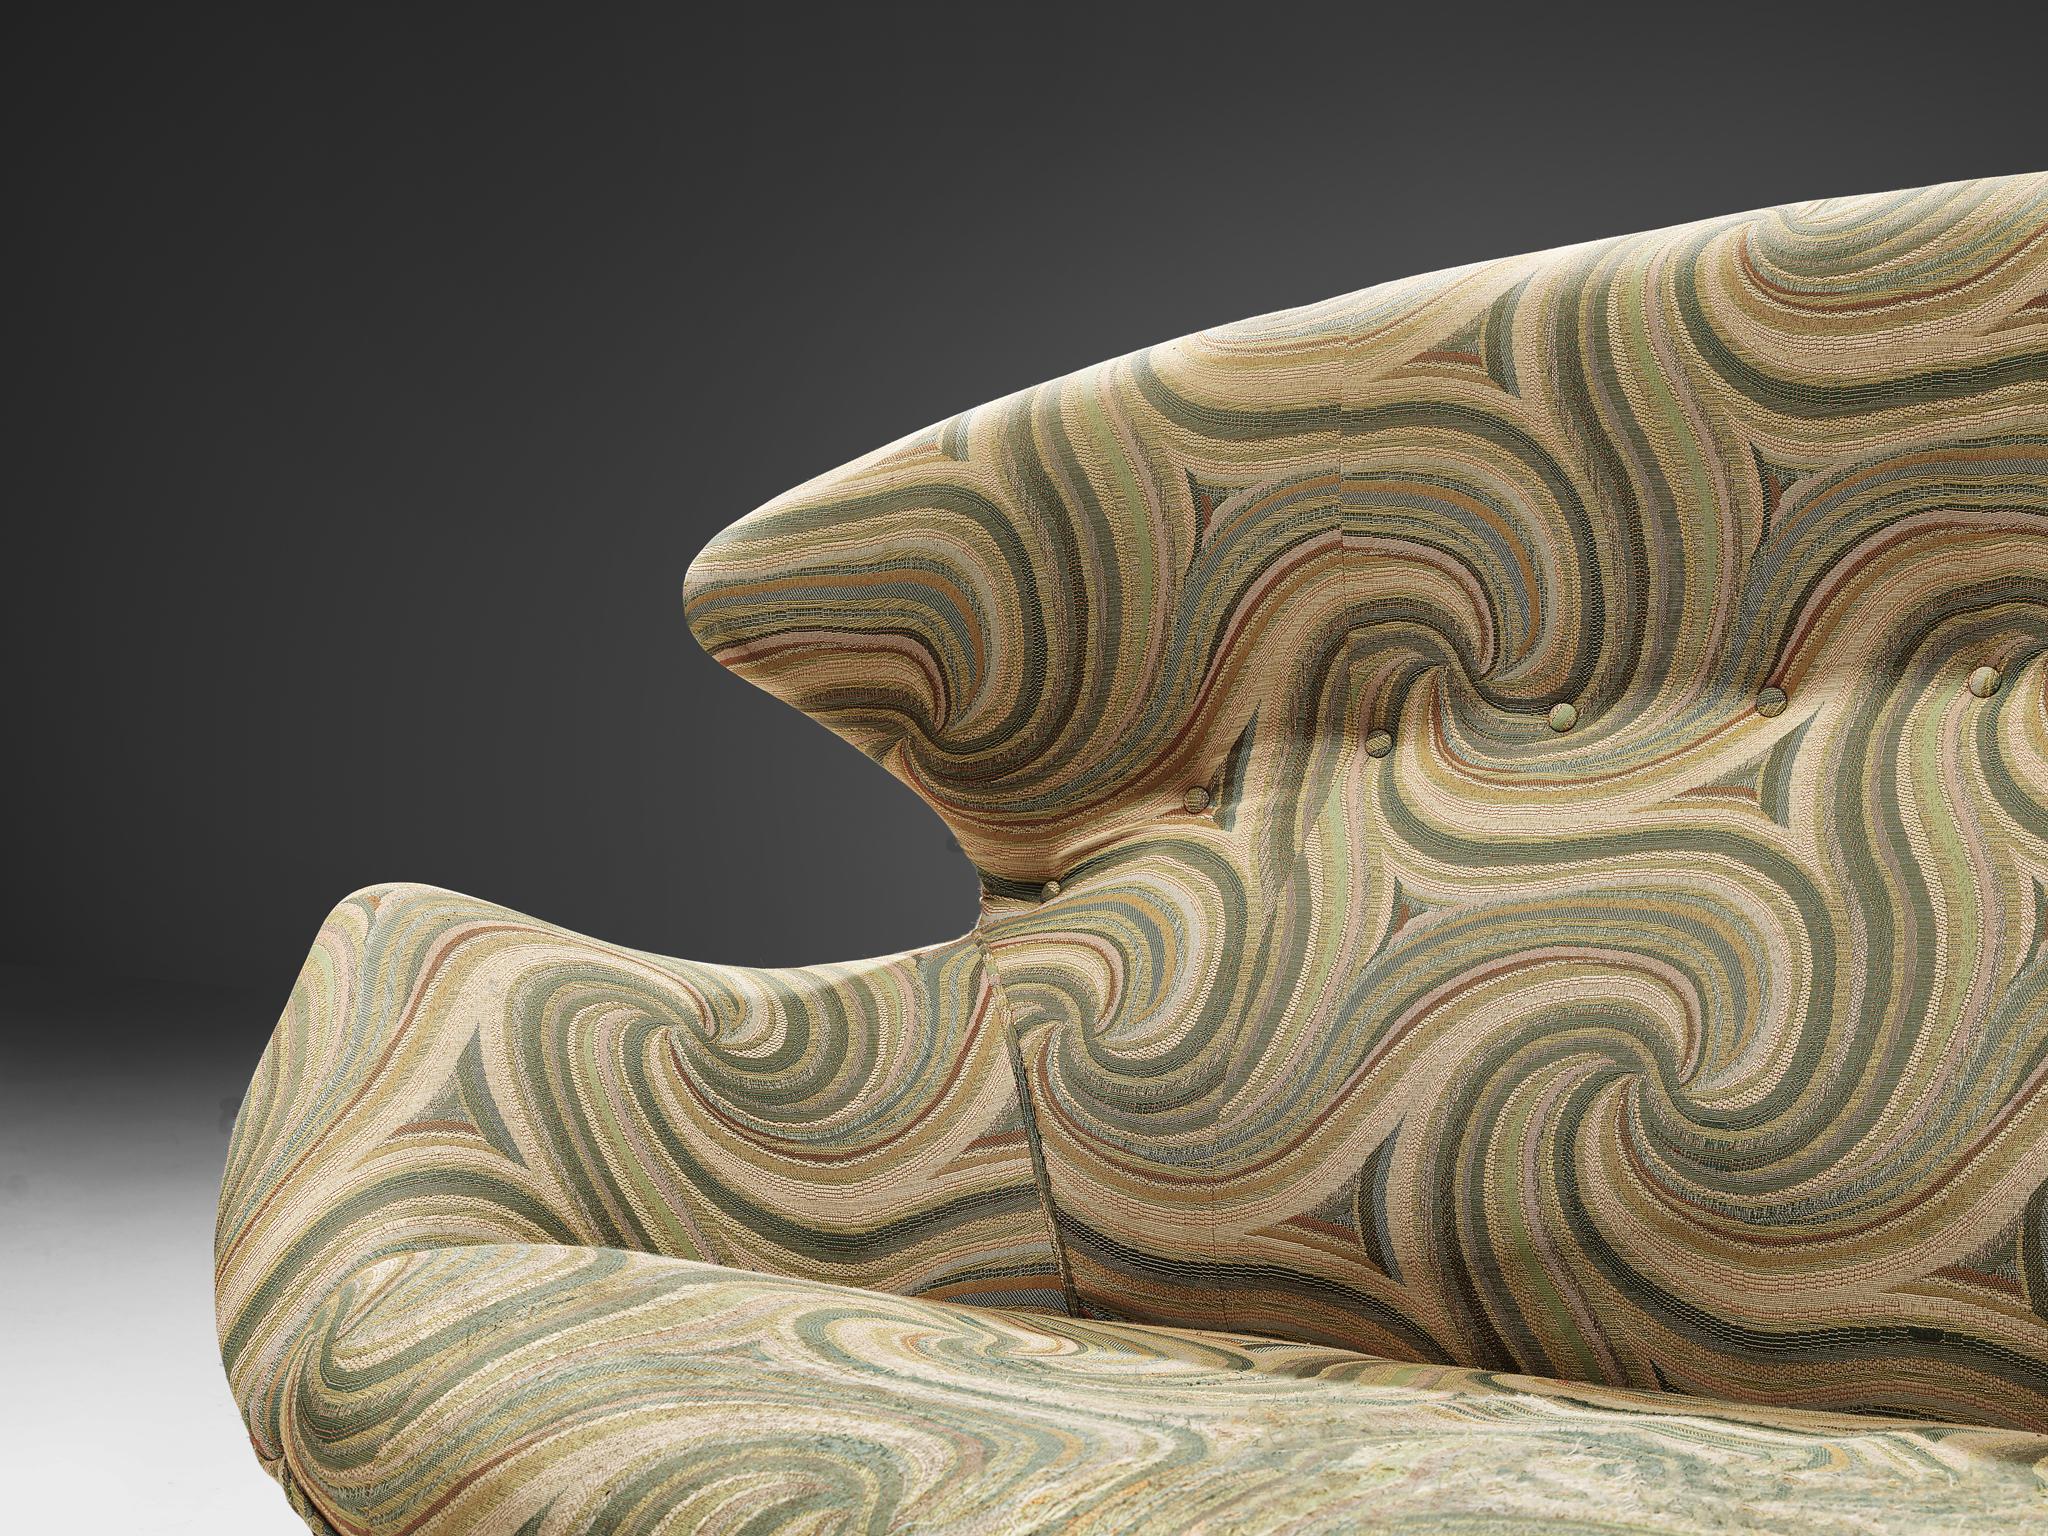 Winged 1970s Sofa in Patterned Upholstery 1